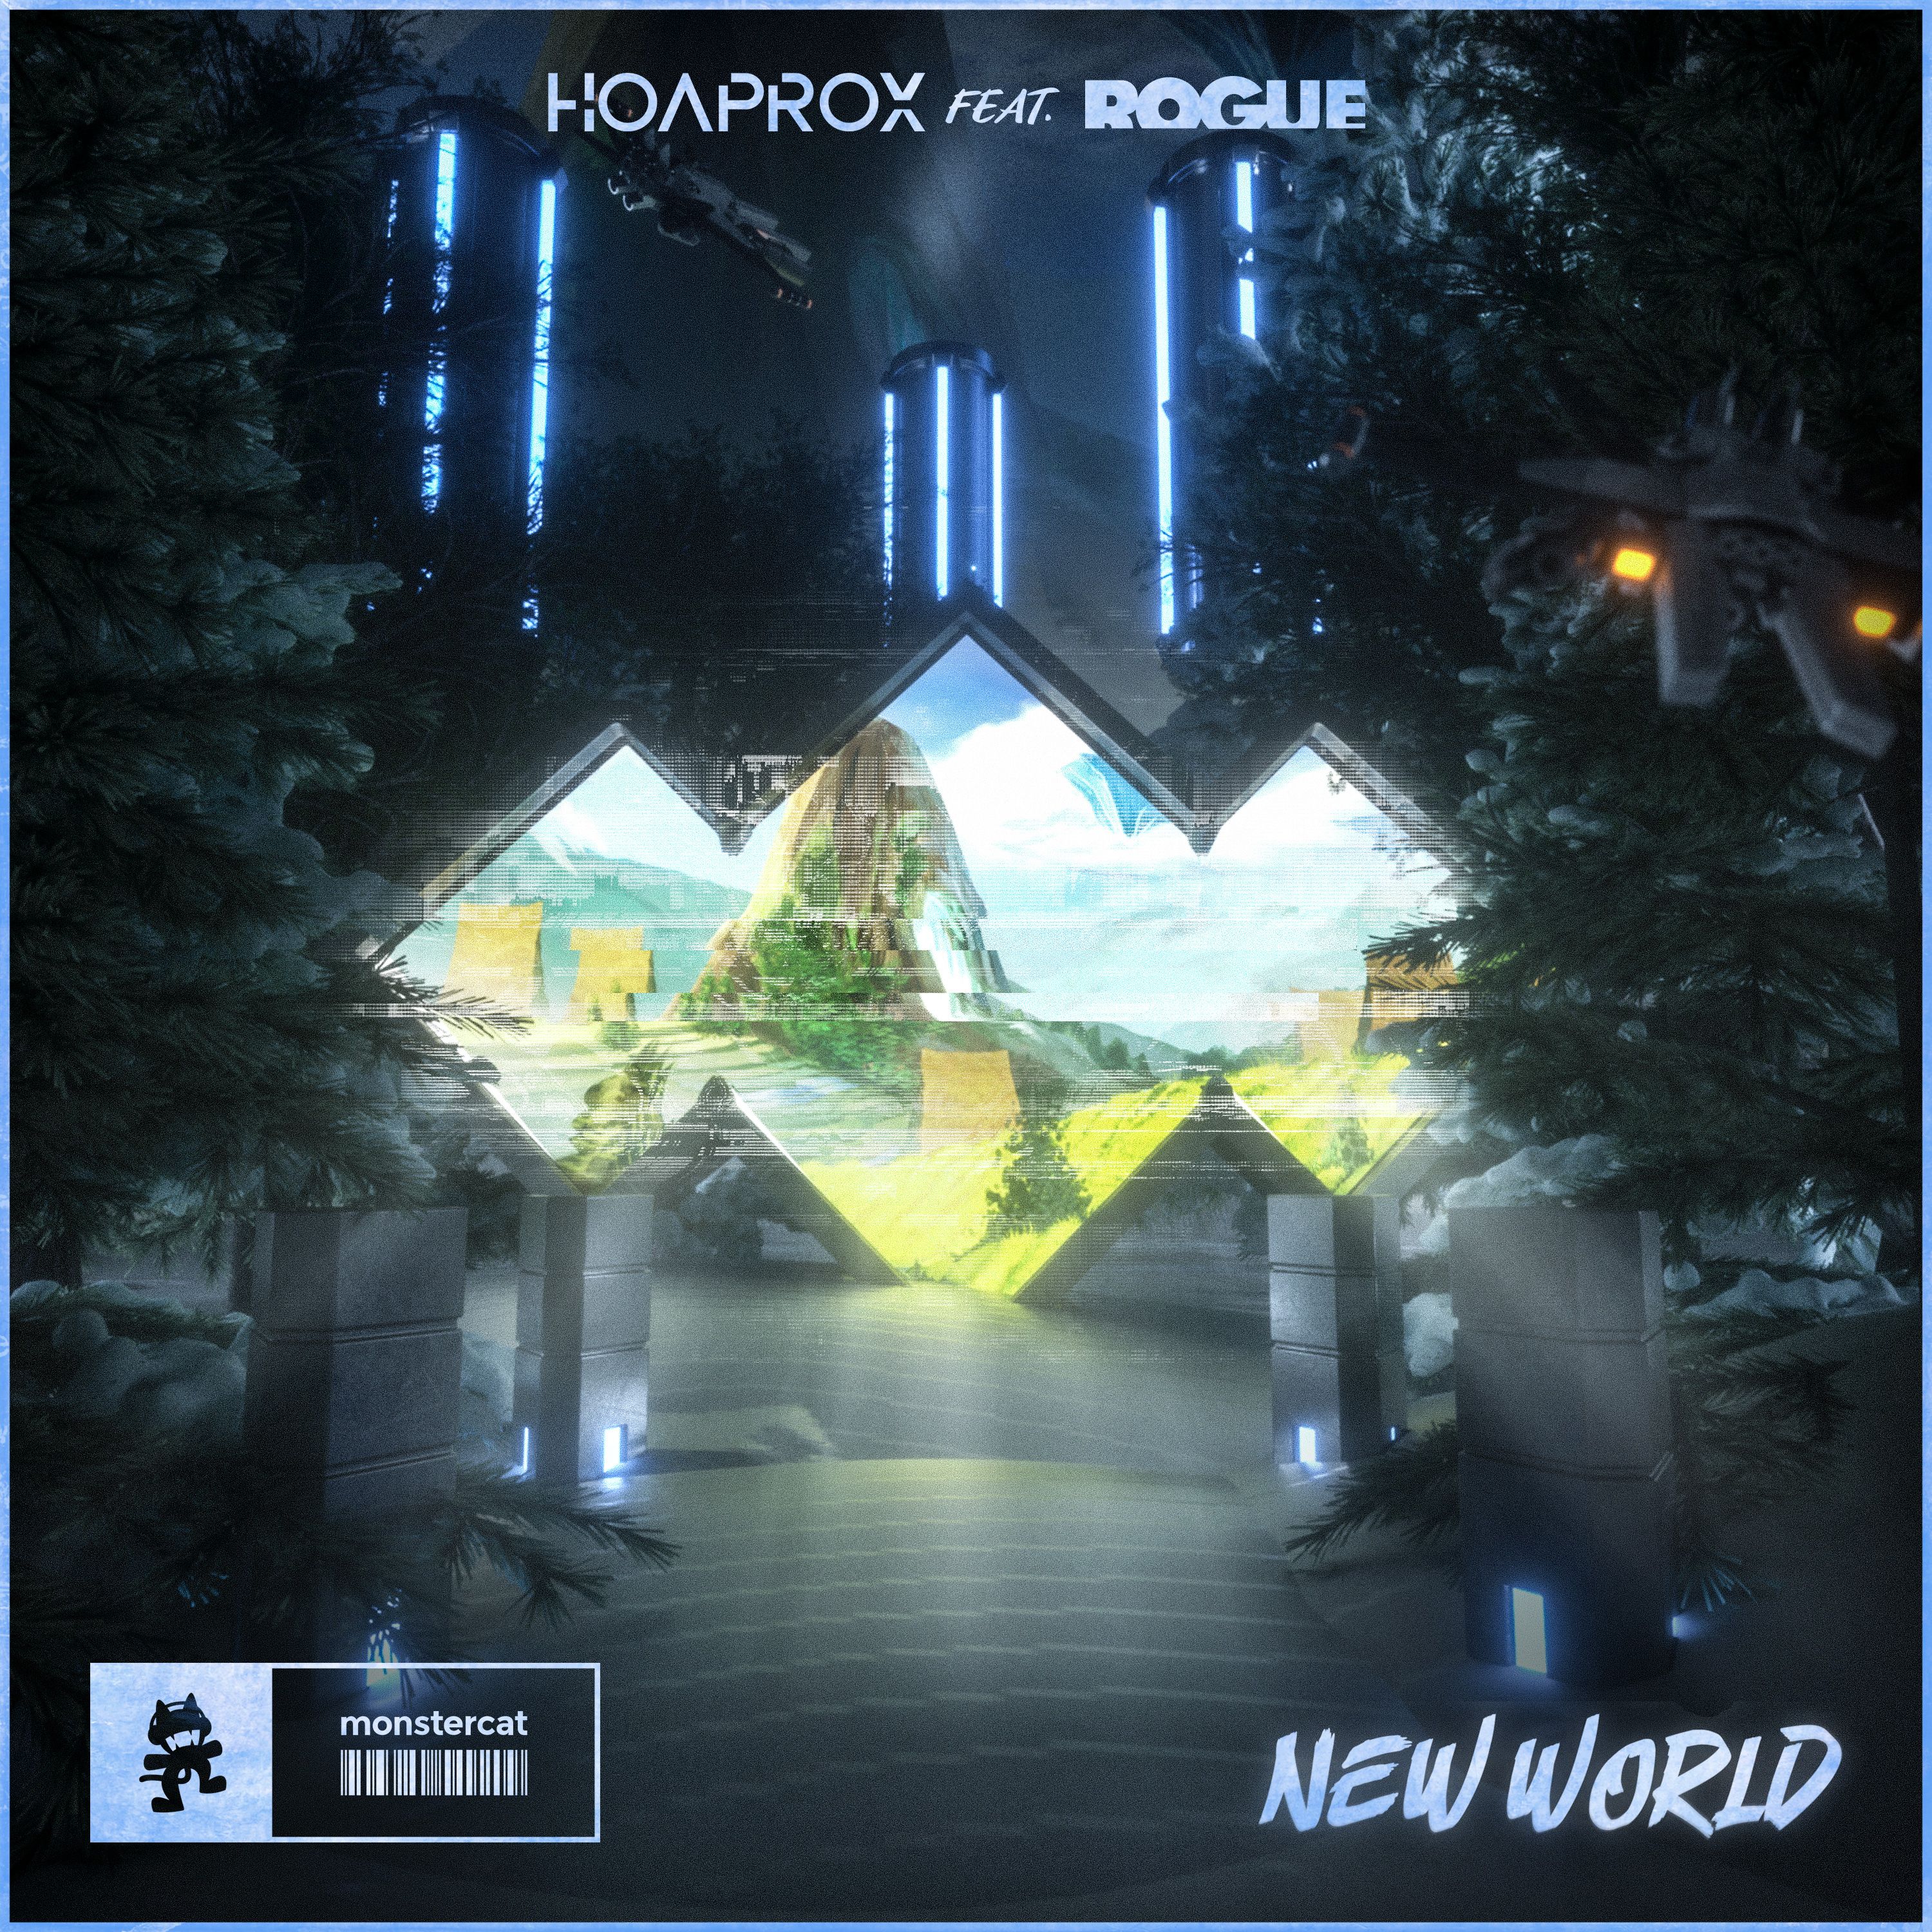 Hoaprox - New World (feat. Rogue)